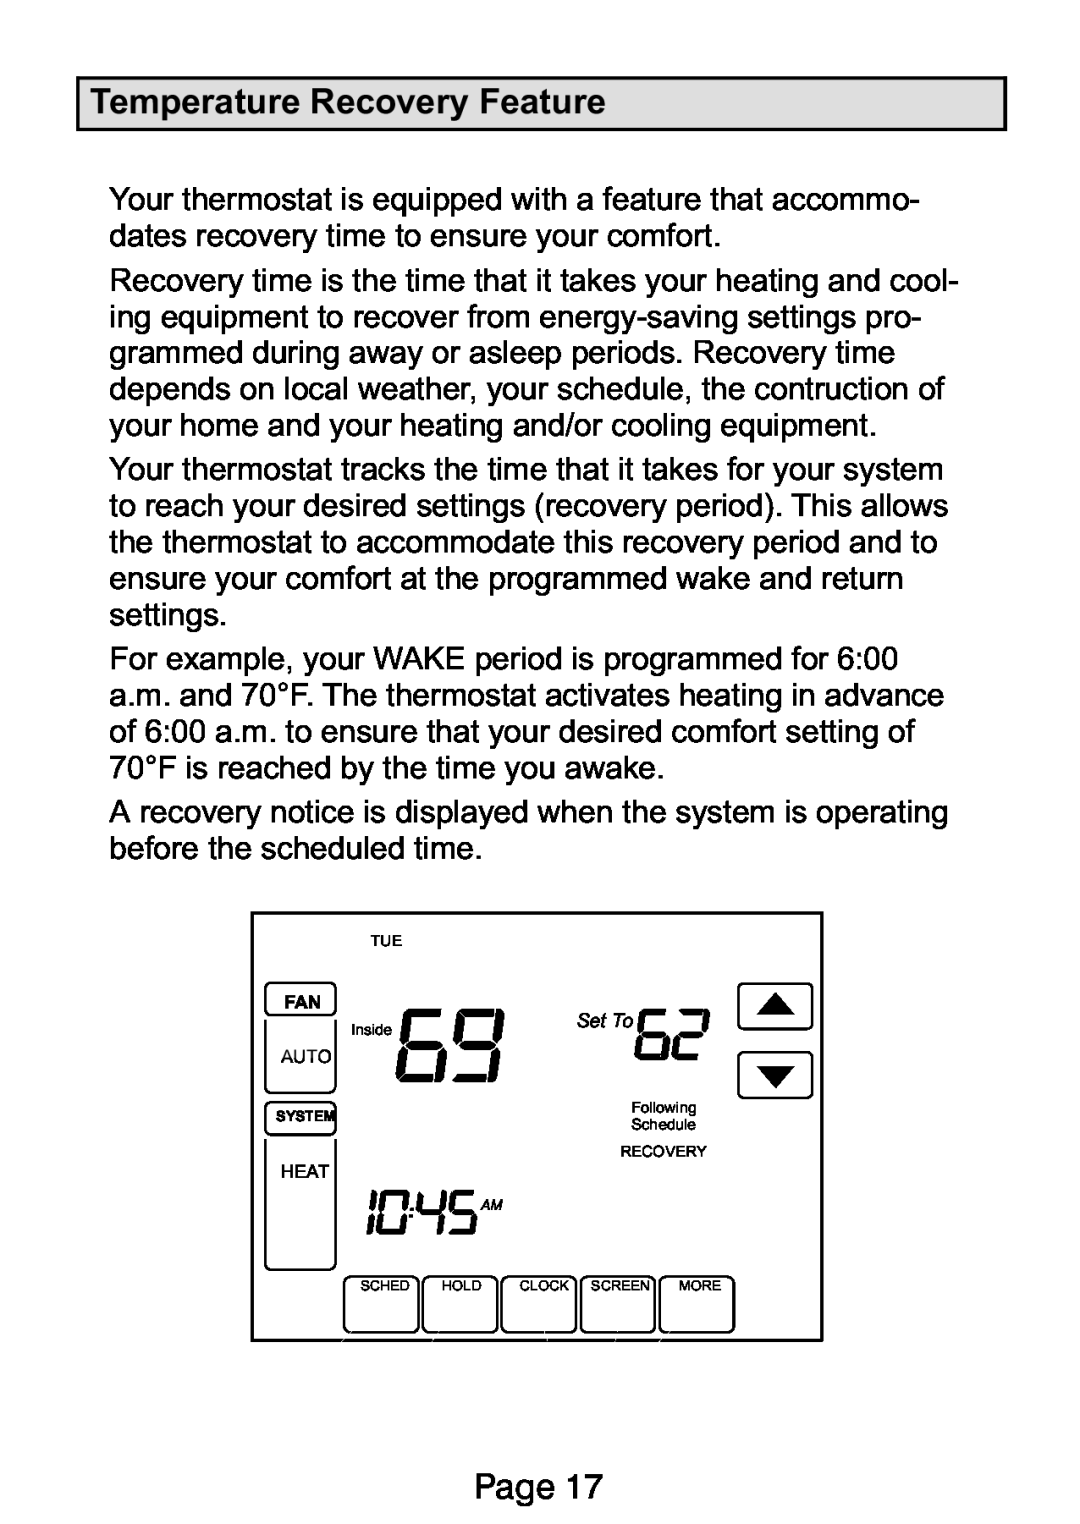 Lennox International Inc Ellite Series Temperature Recovery Feature, Page, Inside, Set To, Following, Schedule RECOVERY 